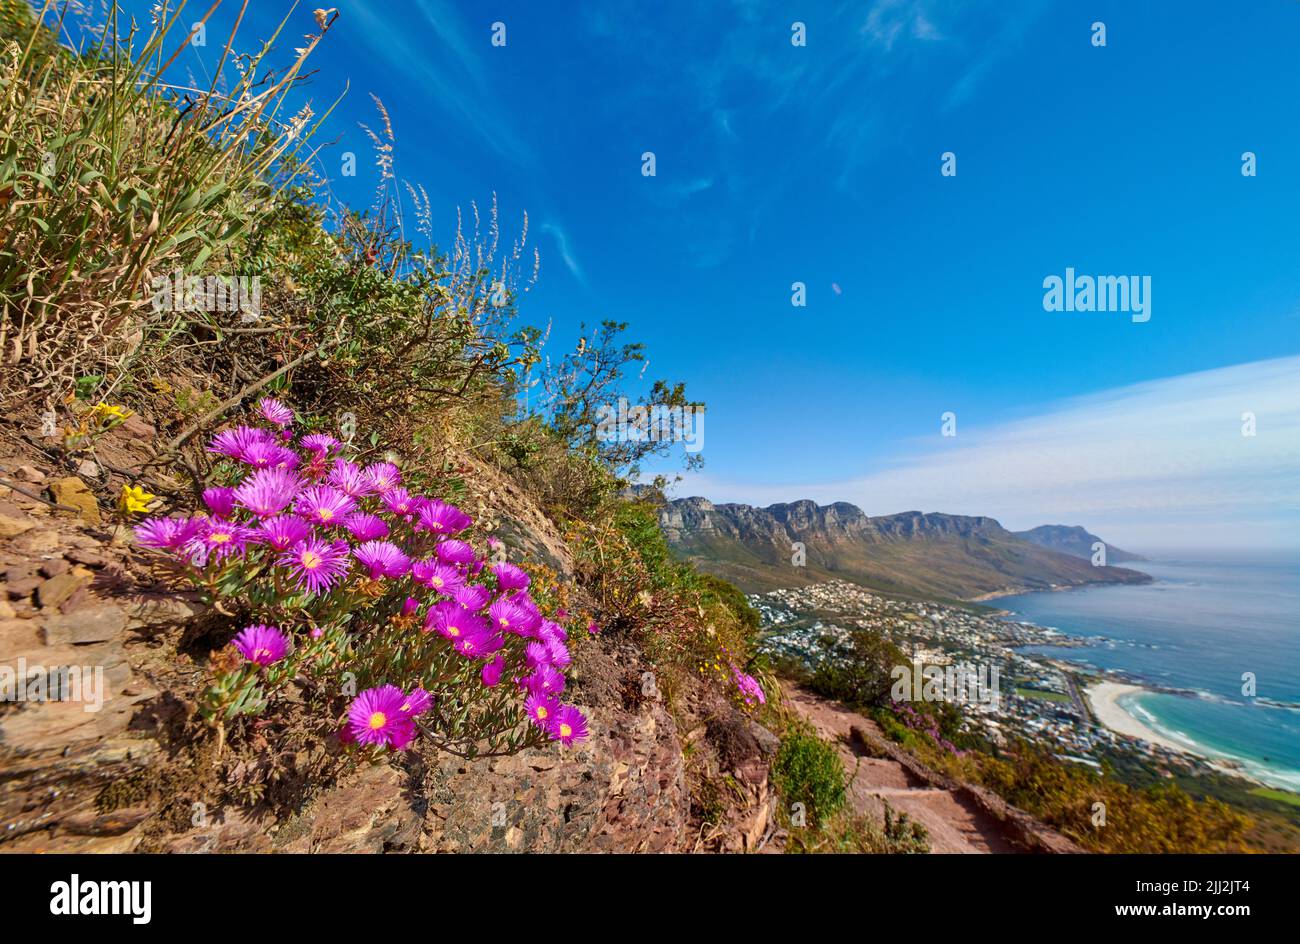 Trailing ice plants with pink flowerheads growing outside on a mountain in their natural habitat. View of lampranthus spectabilis, a species of Stock Photo